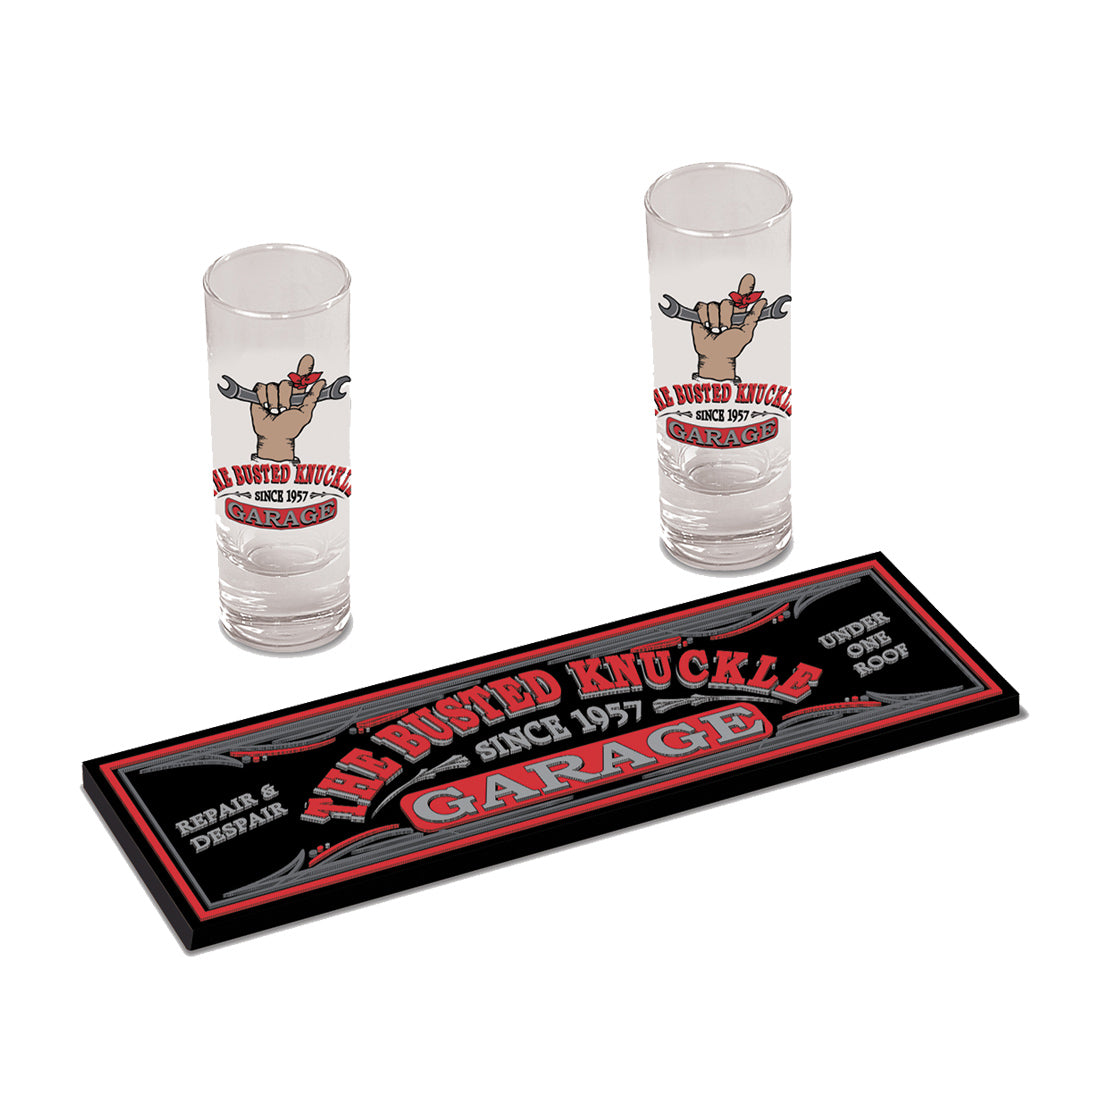 Busted Knuckle Garage Car Guy Shot Glass Gift Set with Rubber Mat